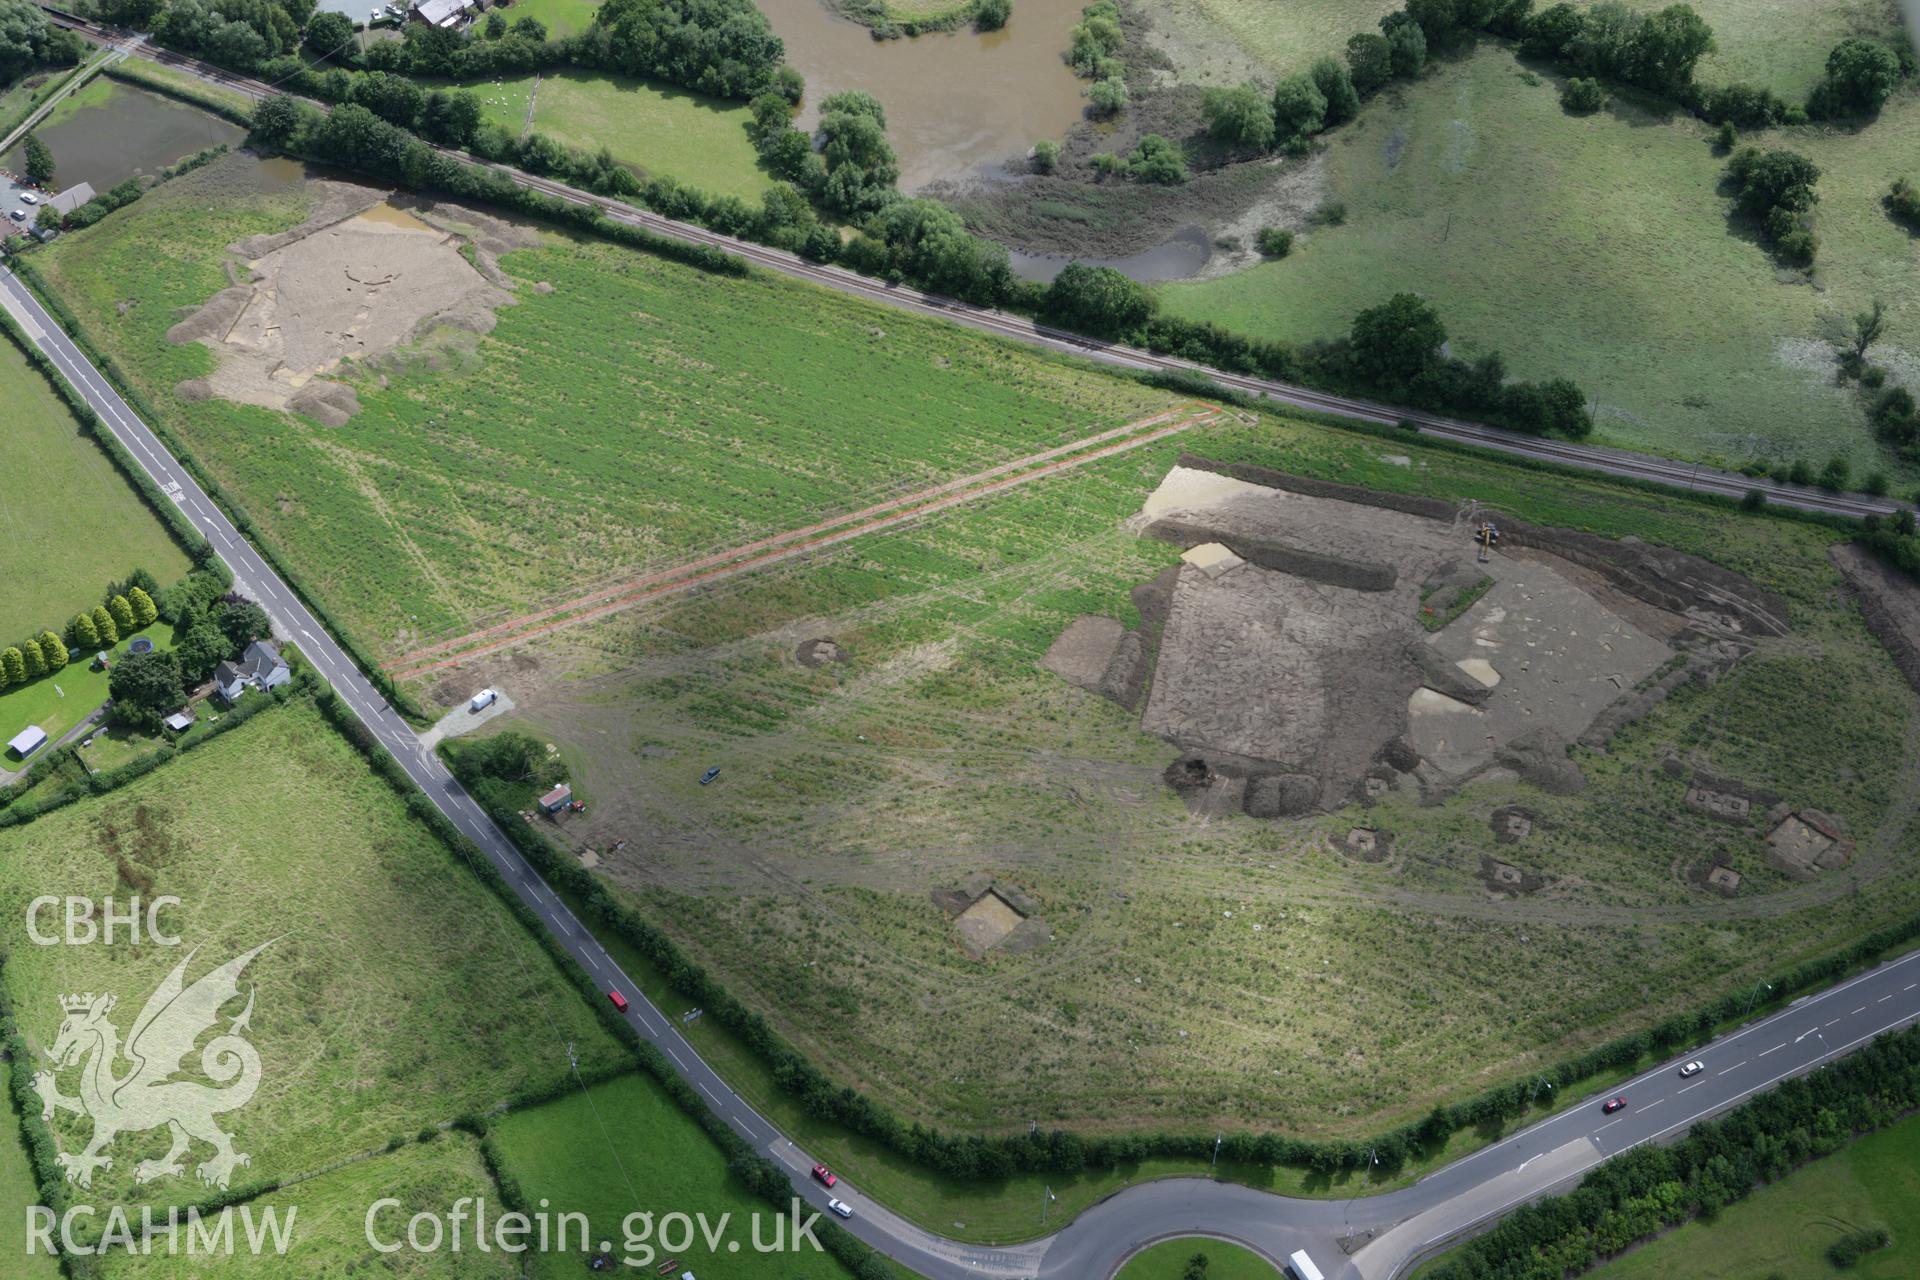 RCAHMW colour oblique aerial photograph of excavations around Buttington. Taken on 24 July 2007 by Toby Driver